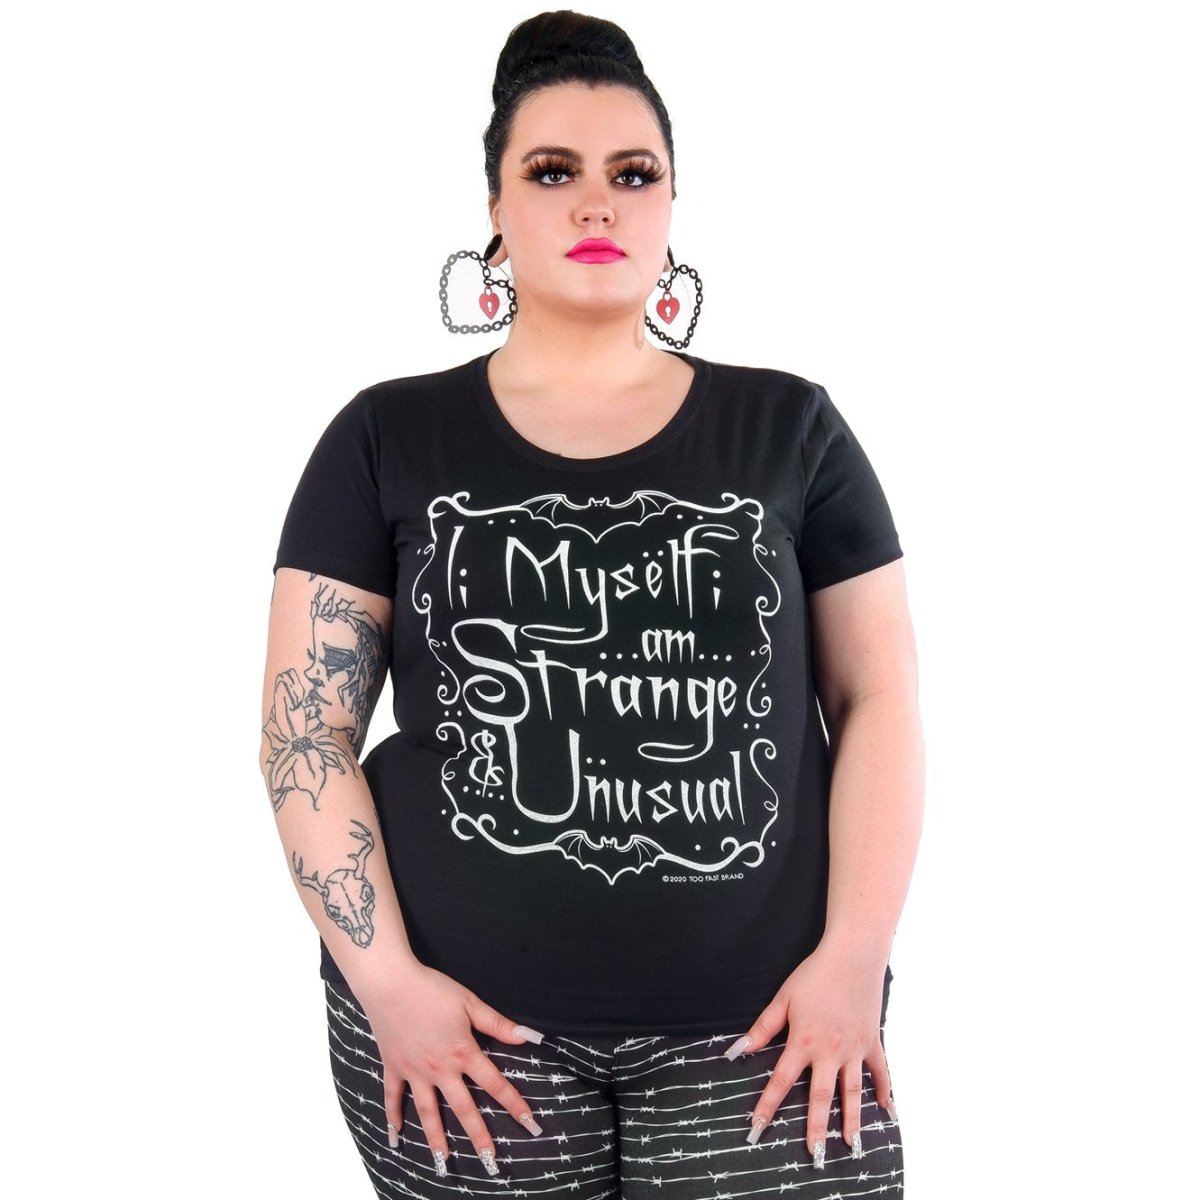 Plus Size Gothic Clothing – The Mystery Of The Dark!  Plus size outfits,  Best plus size dresses, Plus size fashion